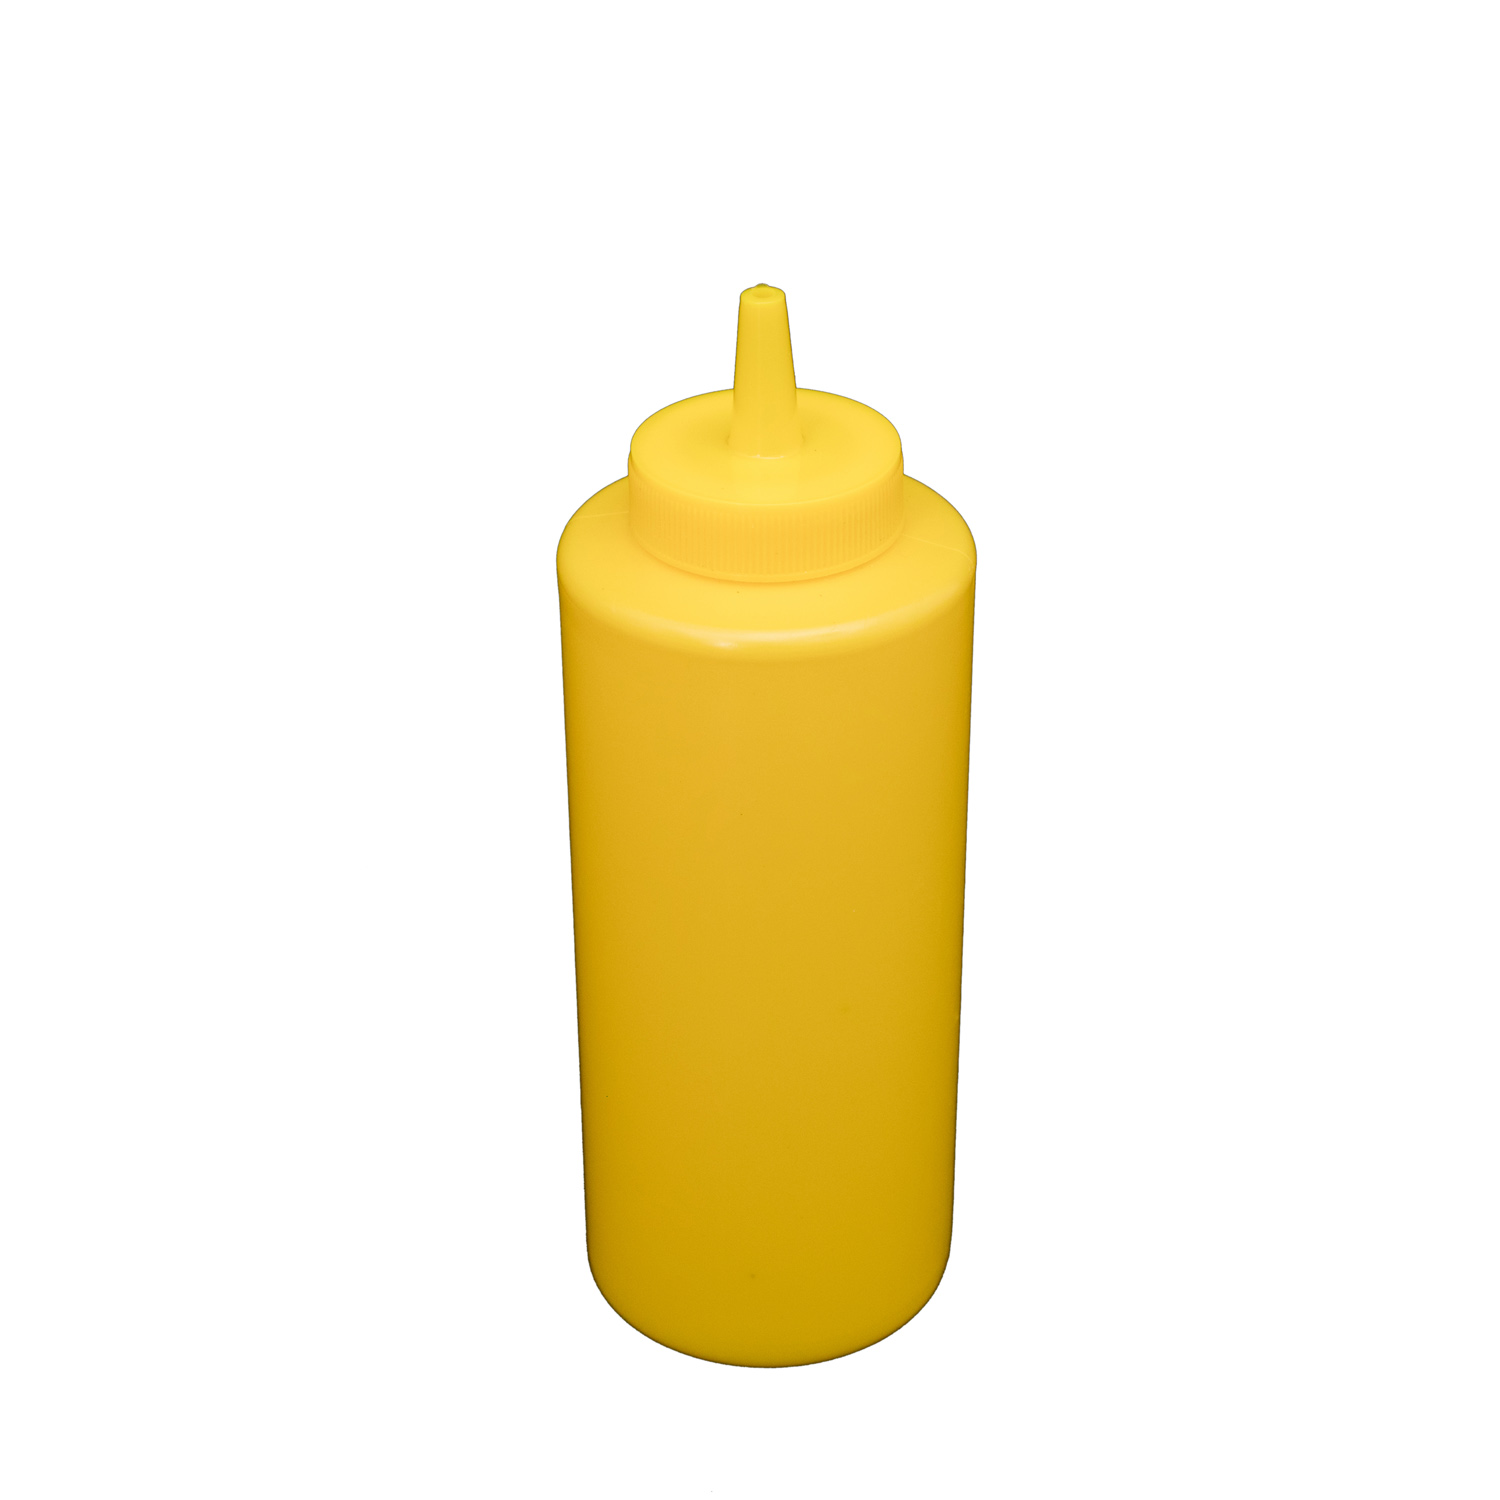 CAC China SQBT-12Y Plastic Squeeze Bottle Yellow 12 oz.